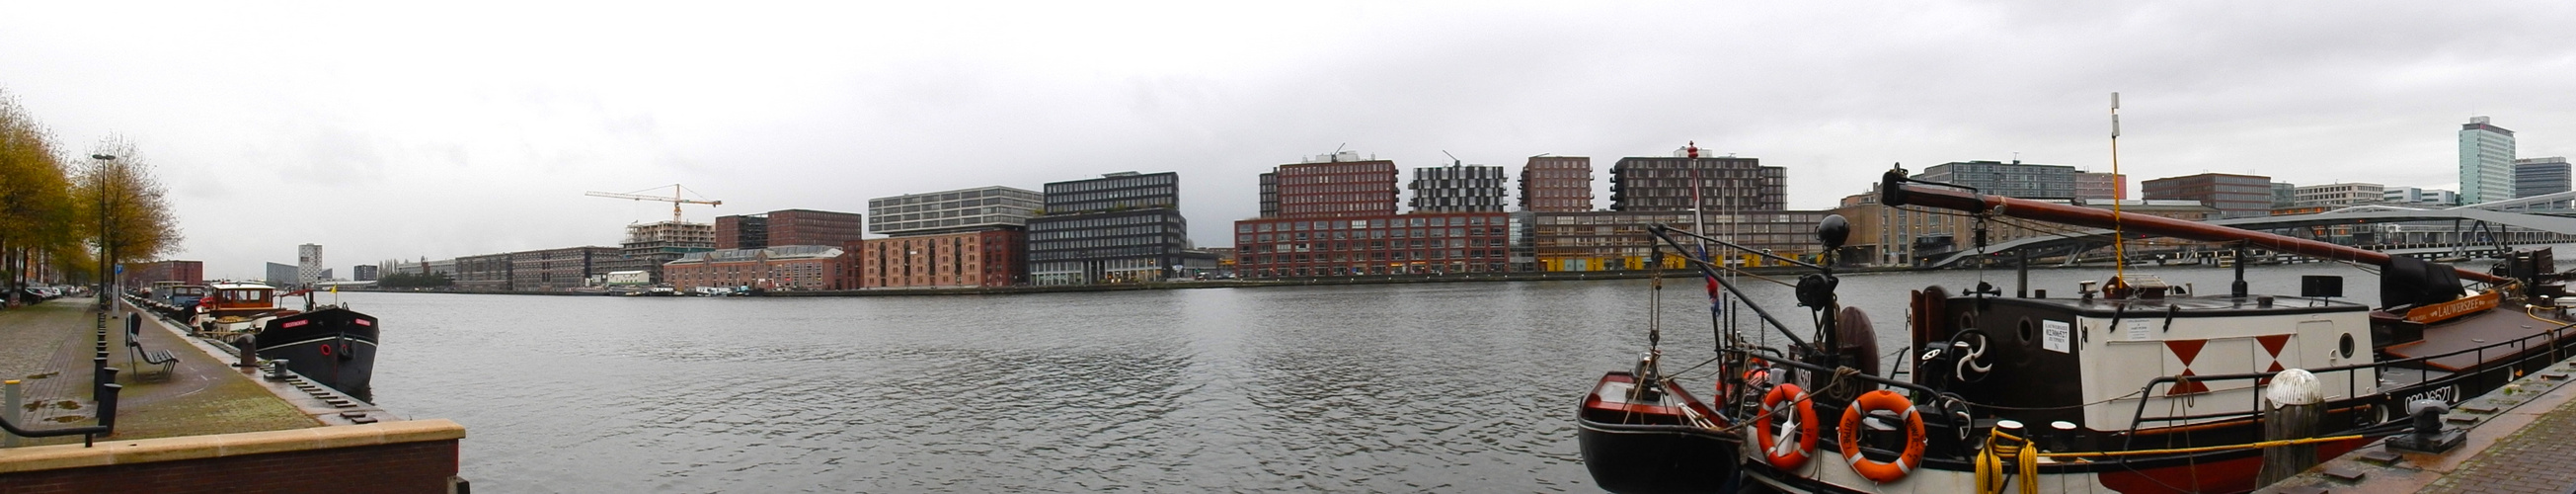 Eastern Docklands Panorama